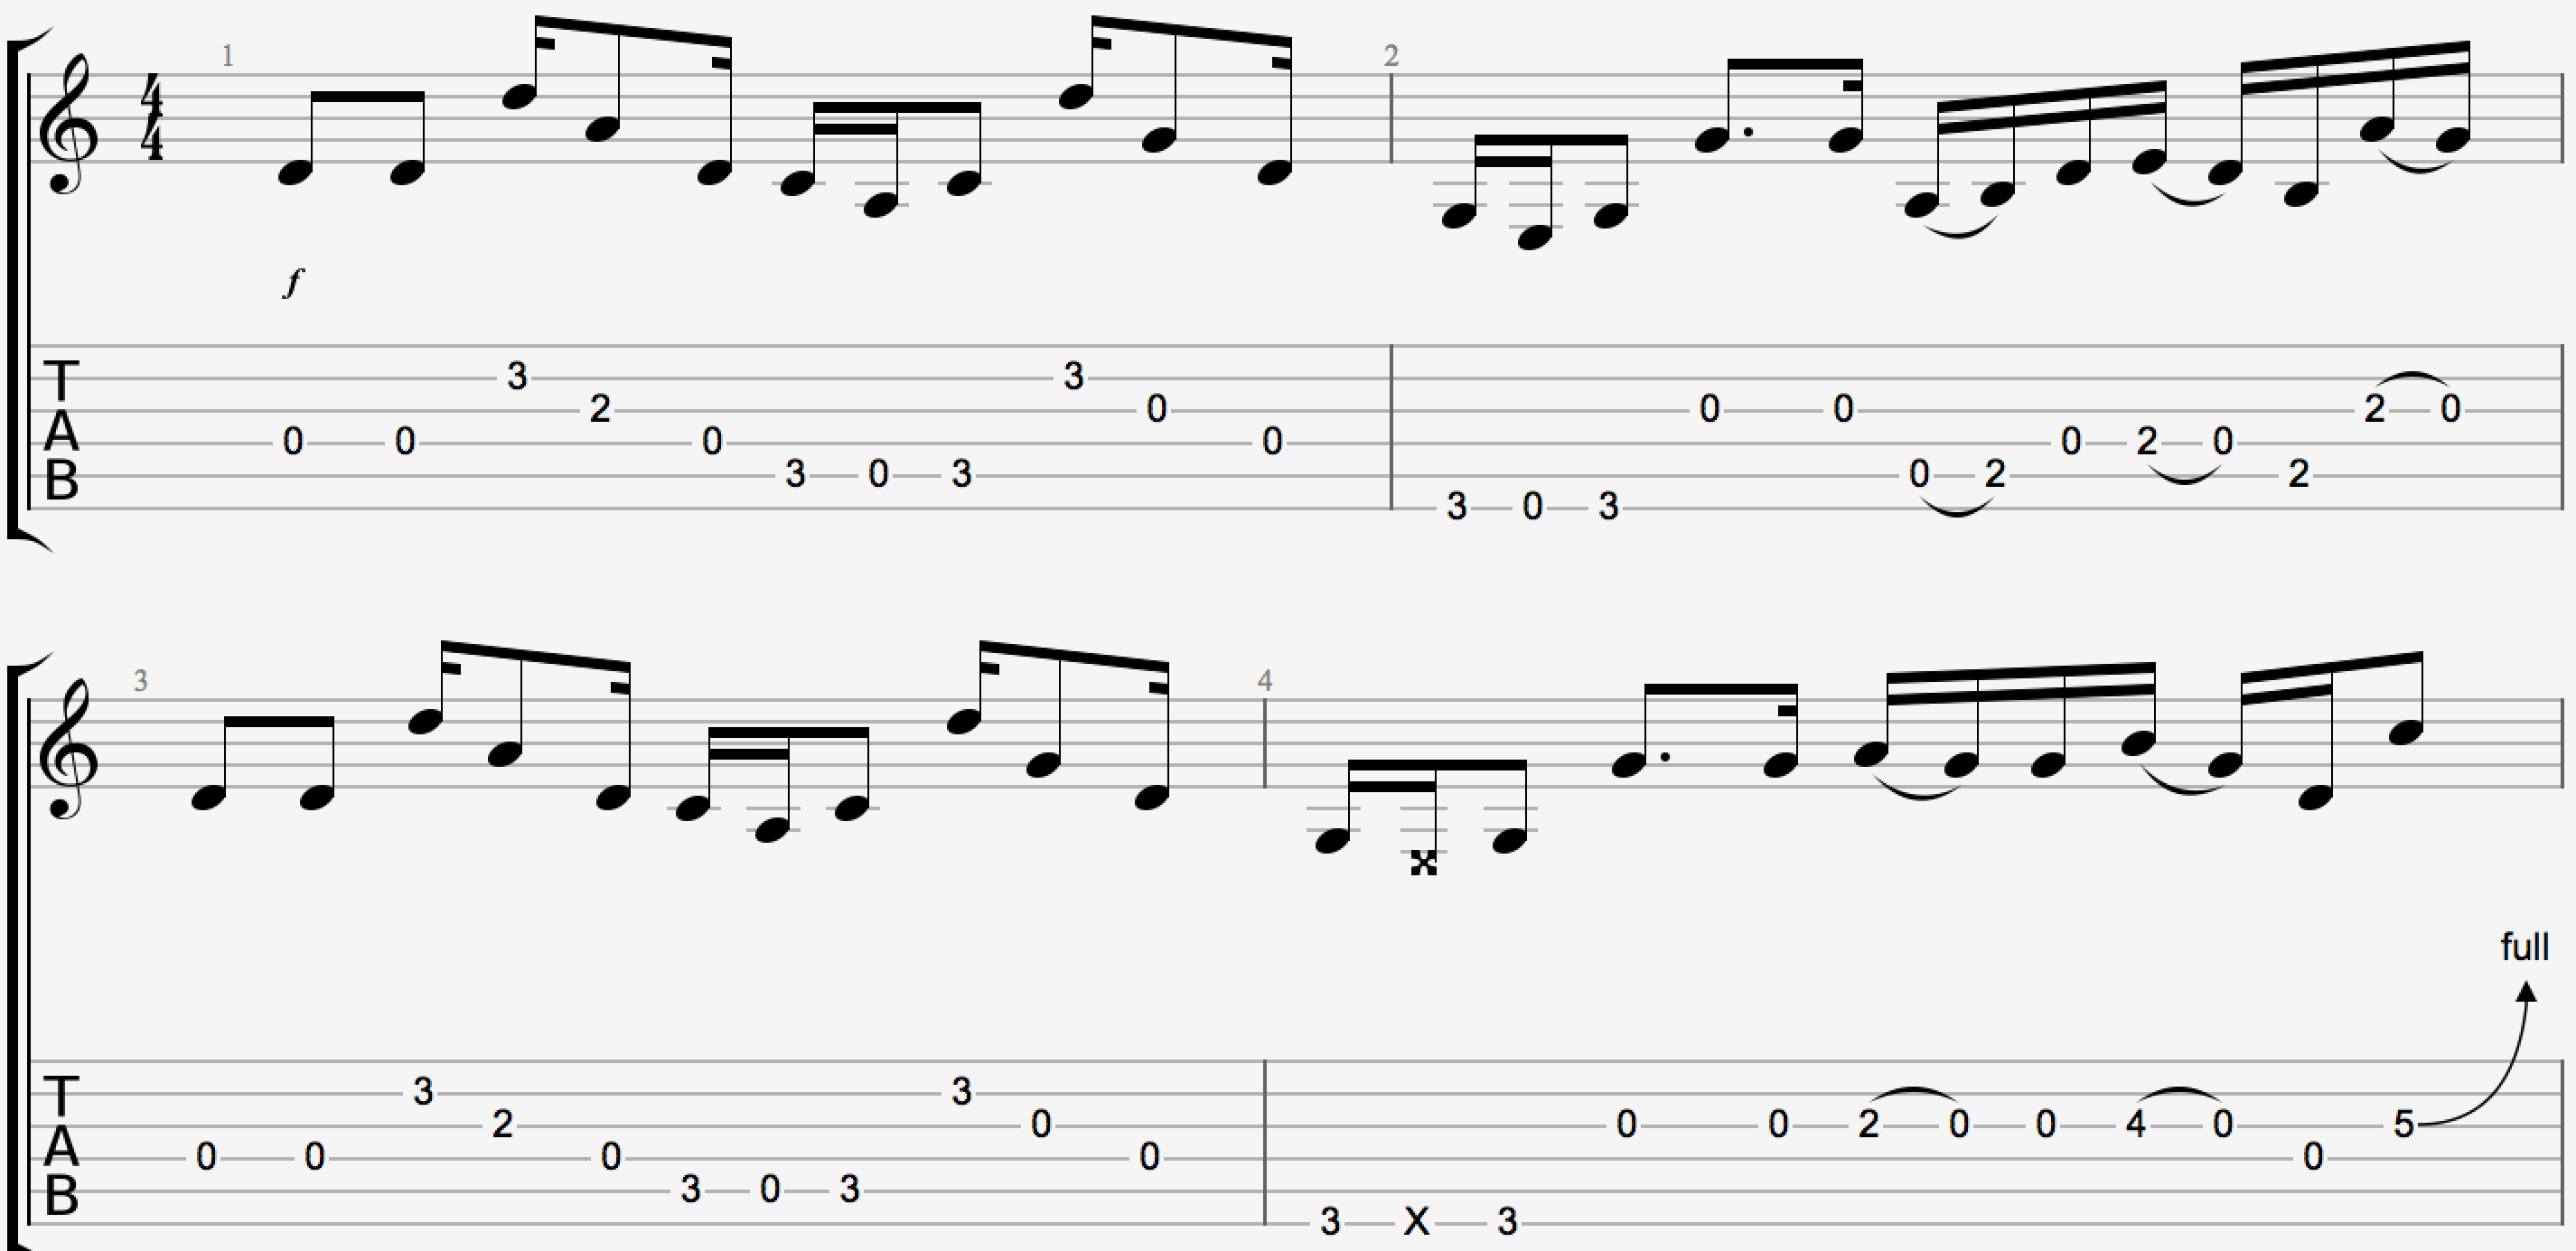 It's a good picking challenge for most: the intro to "Sweet Home Alabama"